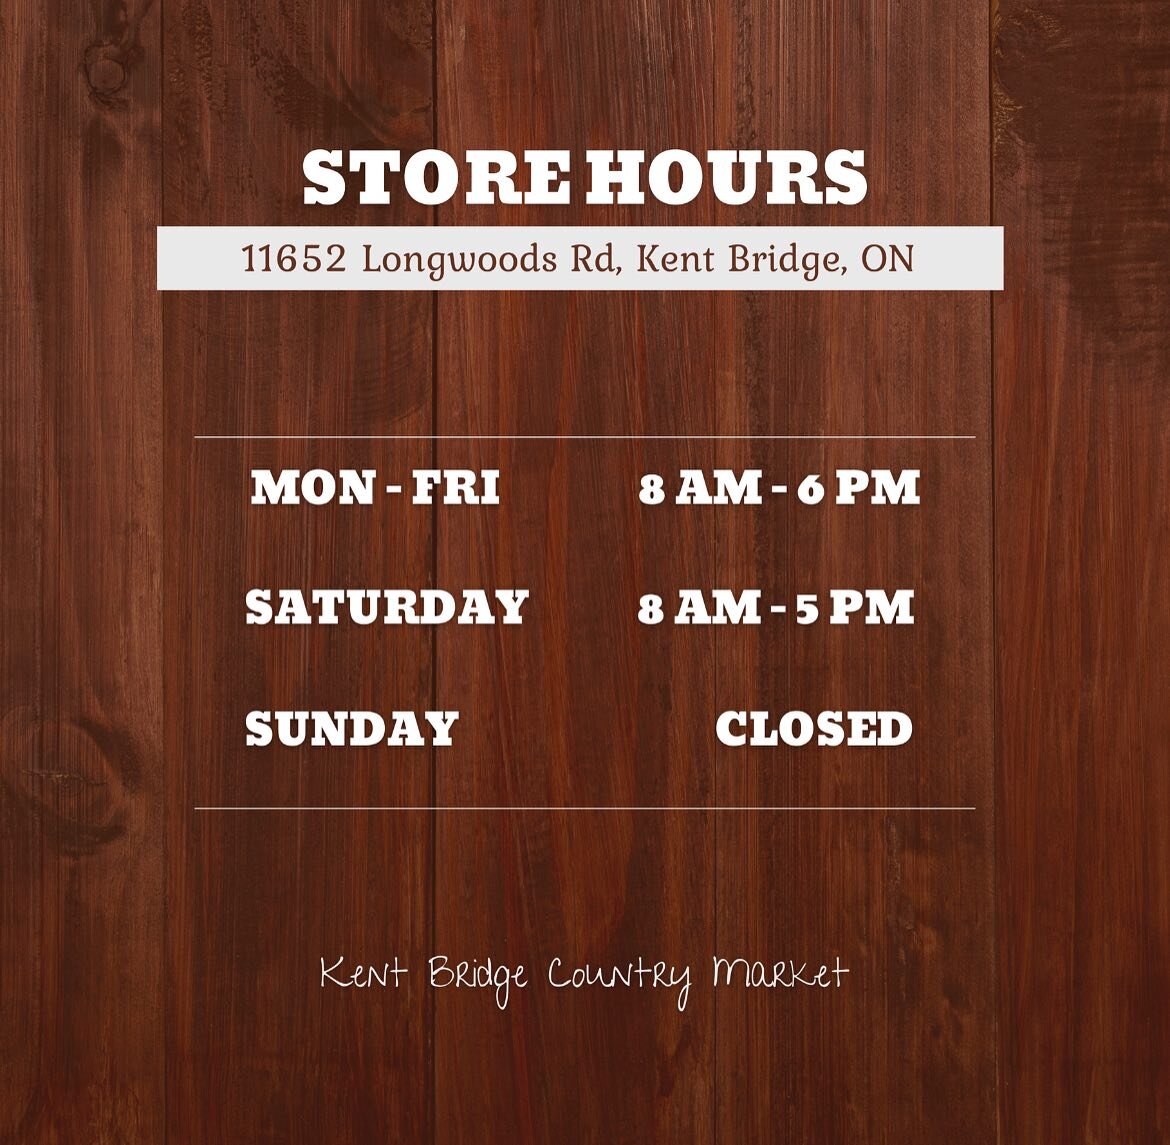 Monday-Friday, we&rsquo;re open til 6! Join us after work for dinner, dessert, or a warm cup of coffee and a chance to browse our selection of distinct, delicious, locally source food and goods!
#kentbridgeontario #kentbridgecountrymarket #shoplocal 